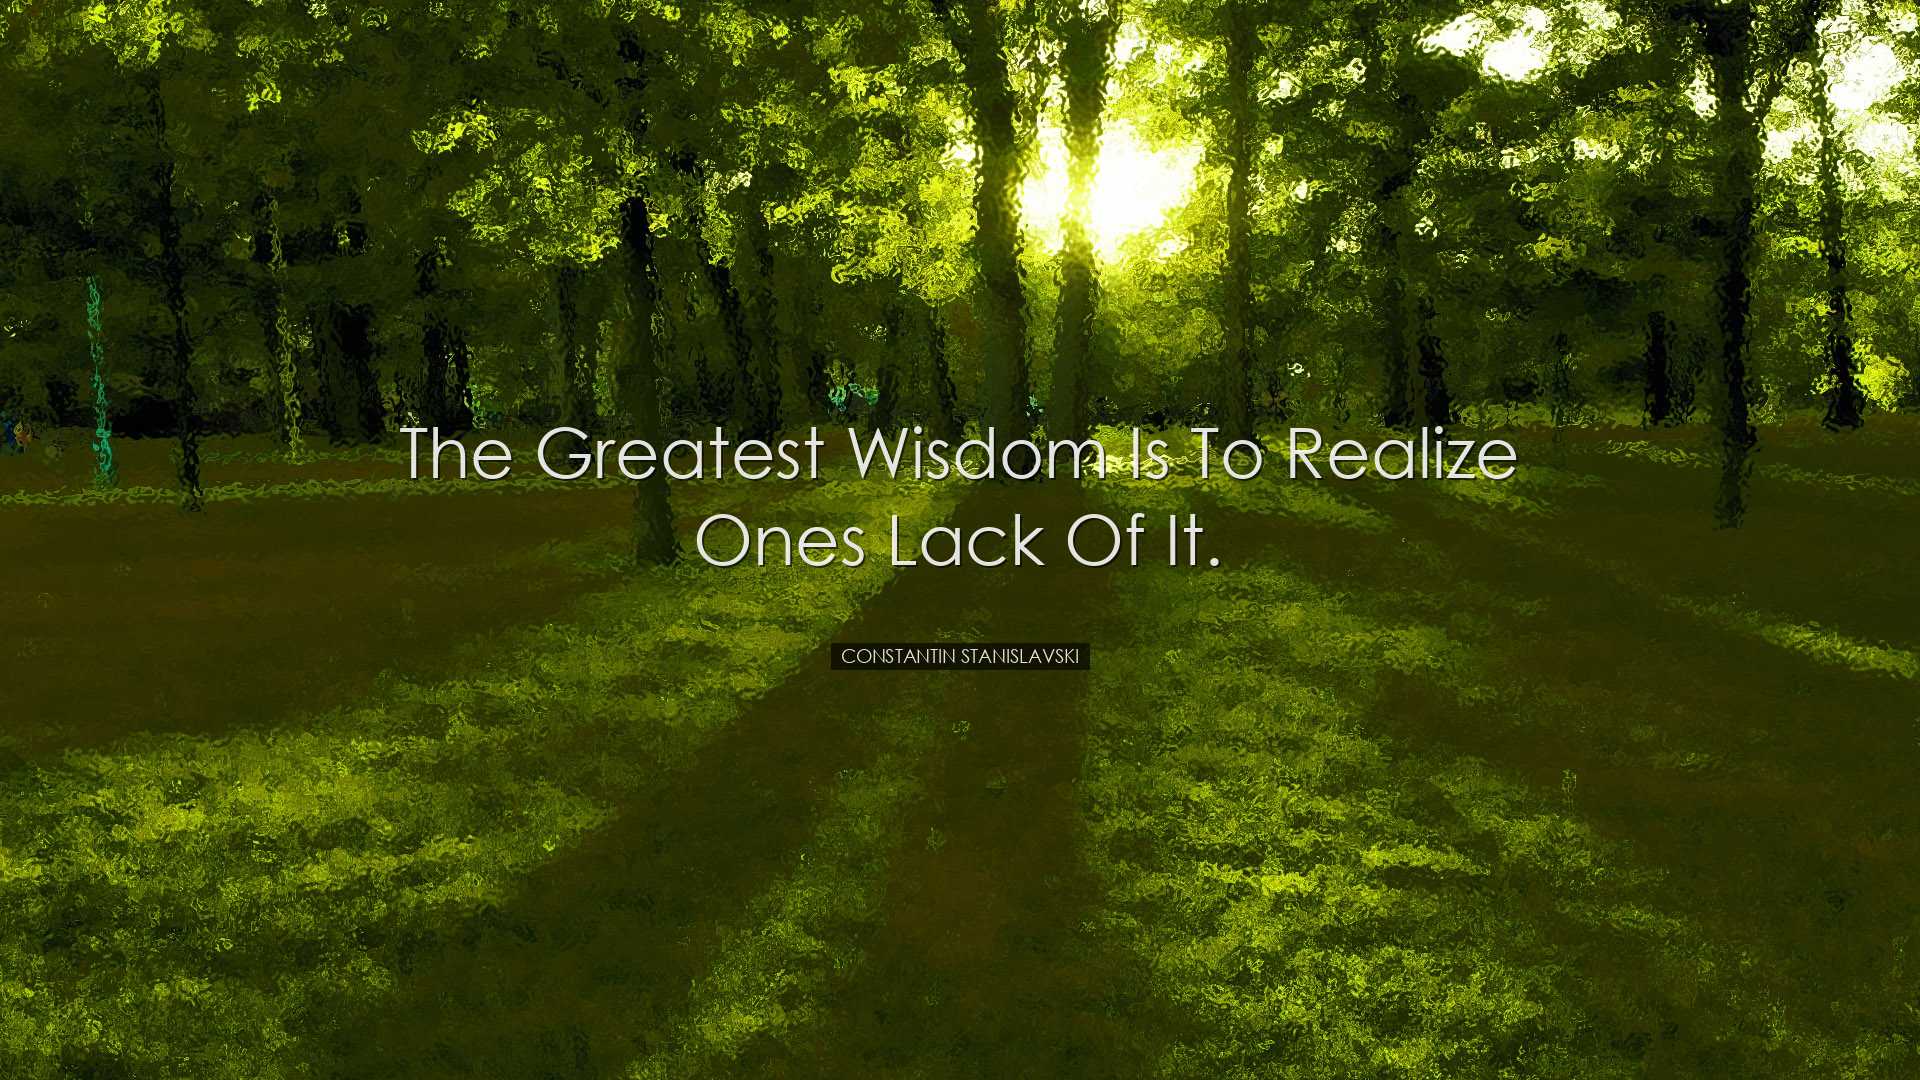 The greatest wisdom is to realize ones lack of it. - Constantin St